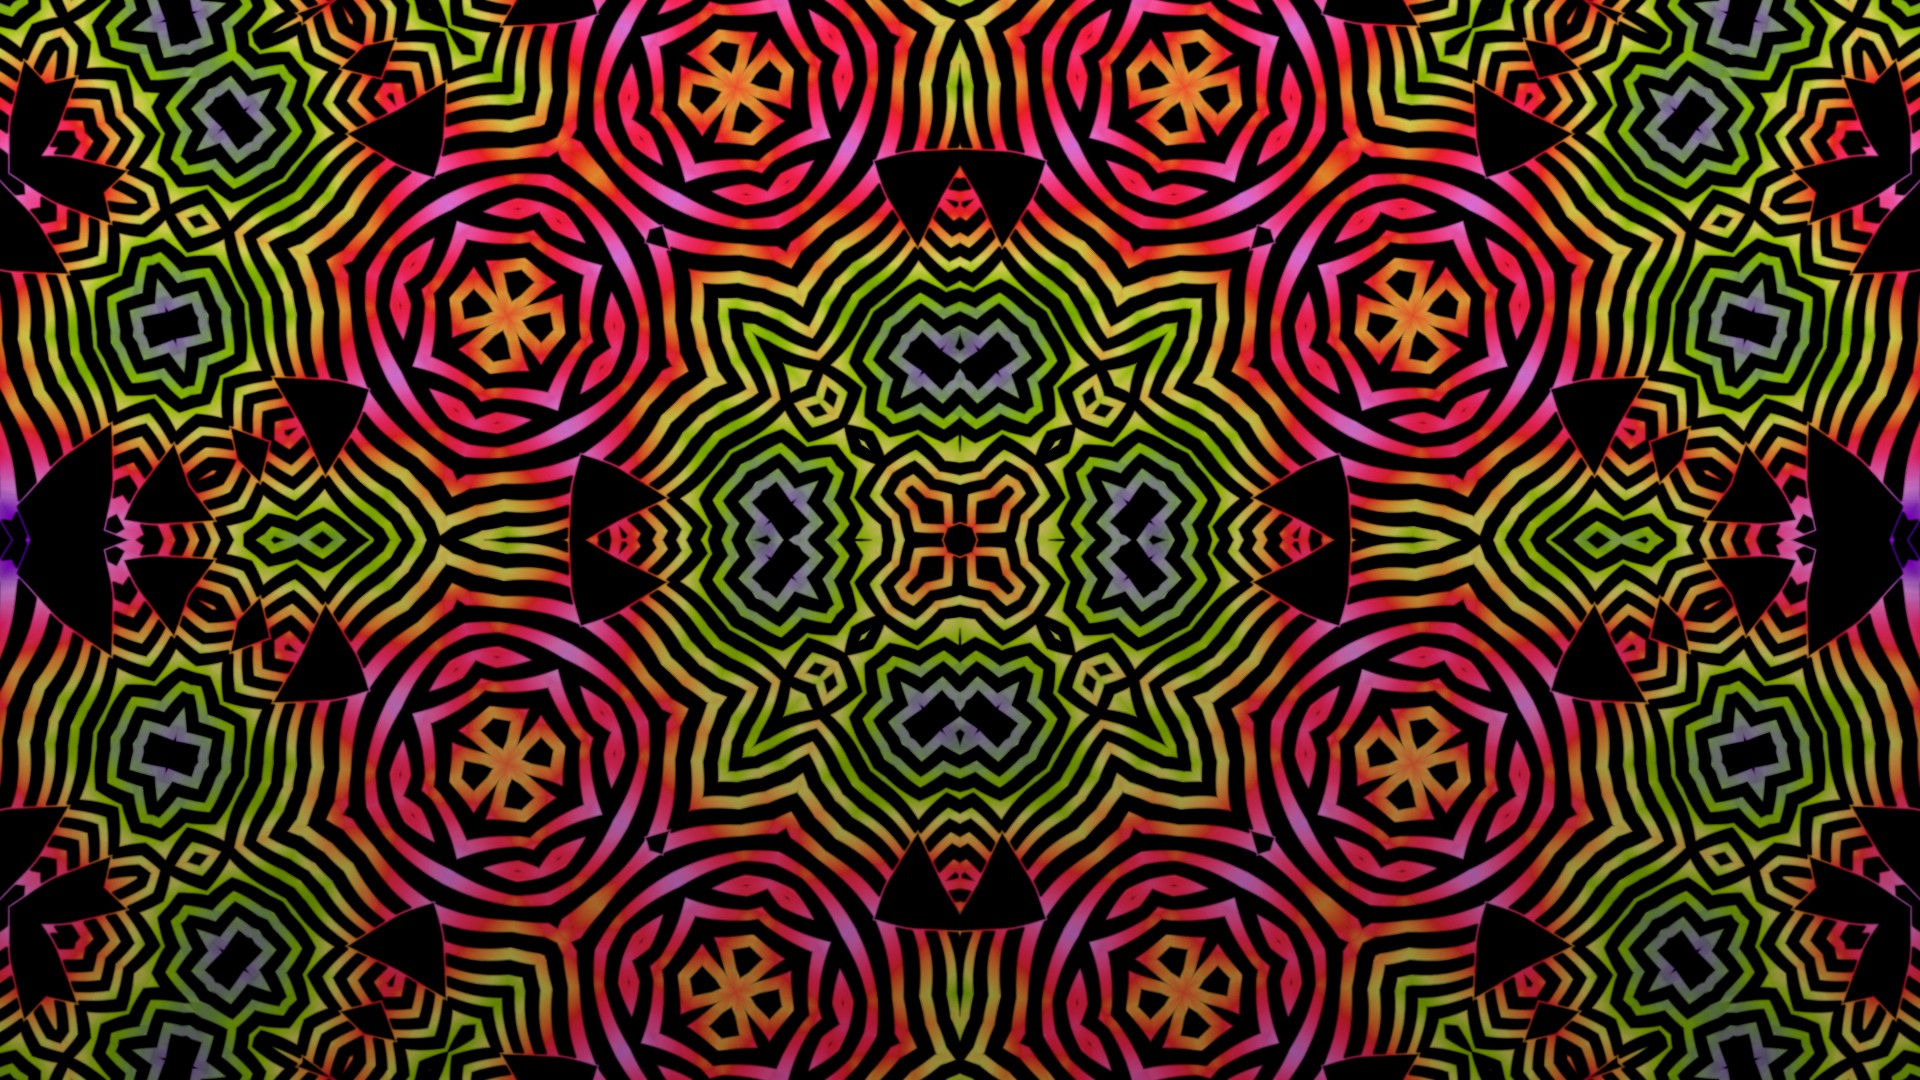 abstract, Multicolor, Patterns, Psychedelic, Digital, Art, Backgrounds, Kaleidoscope, Colors, Psyche Wallpaper